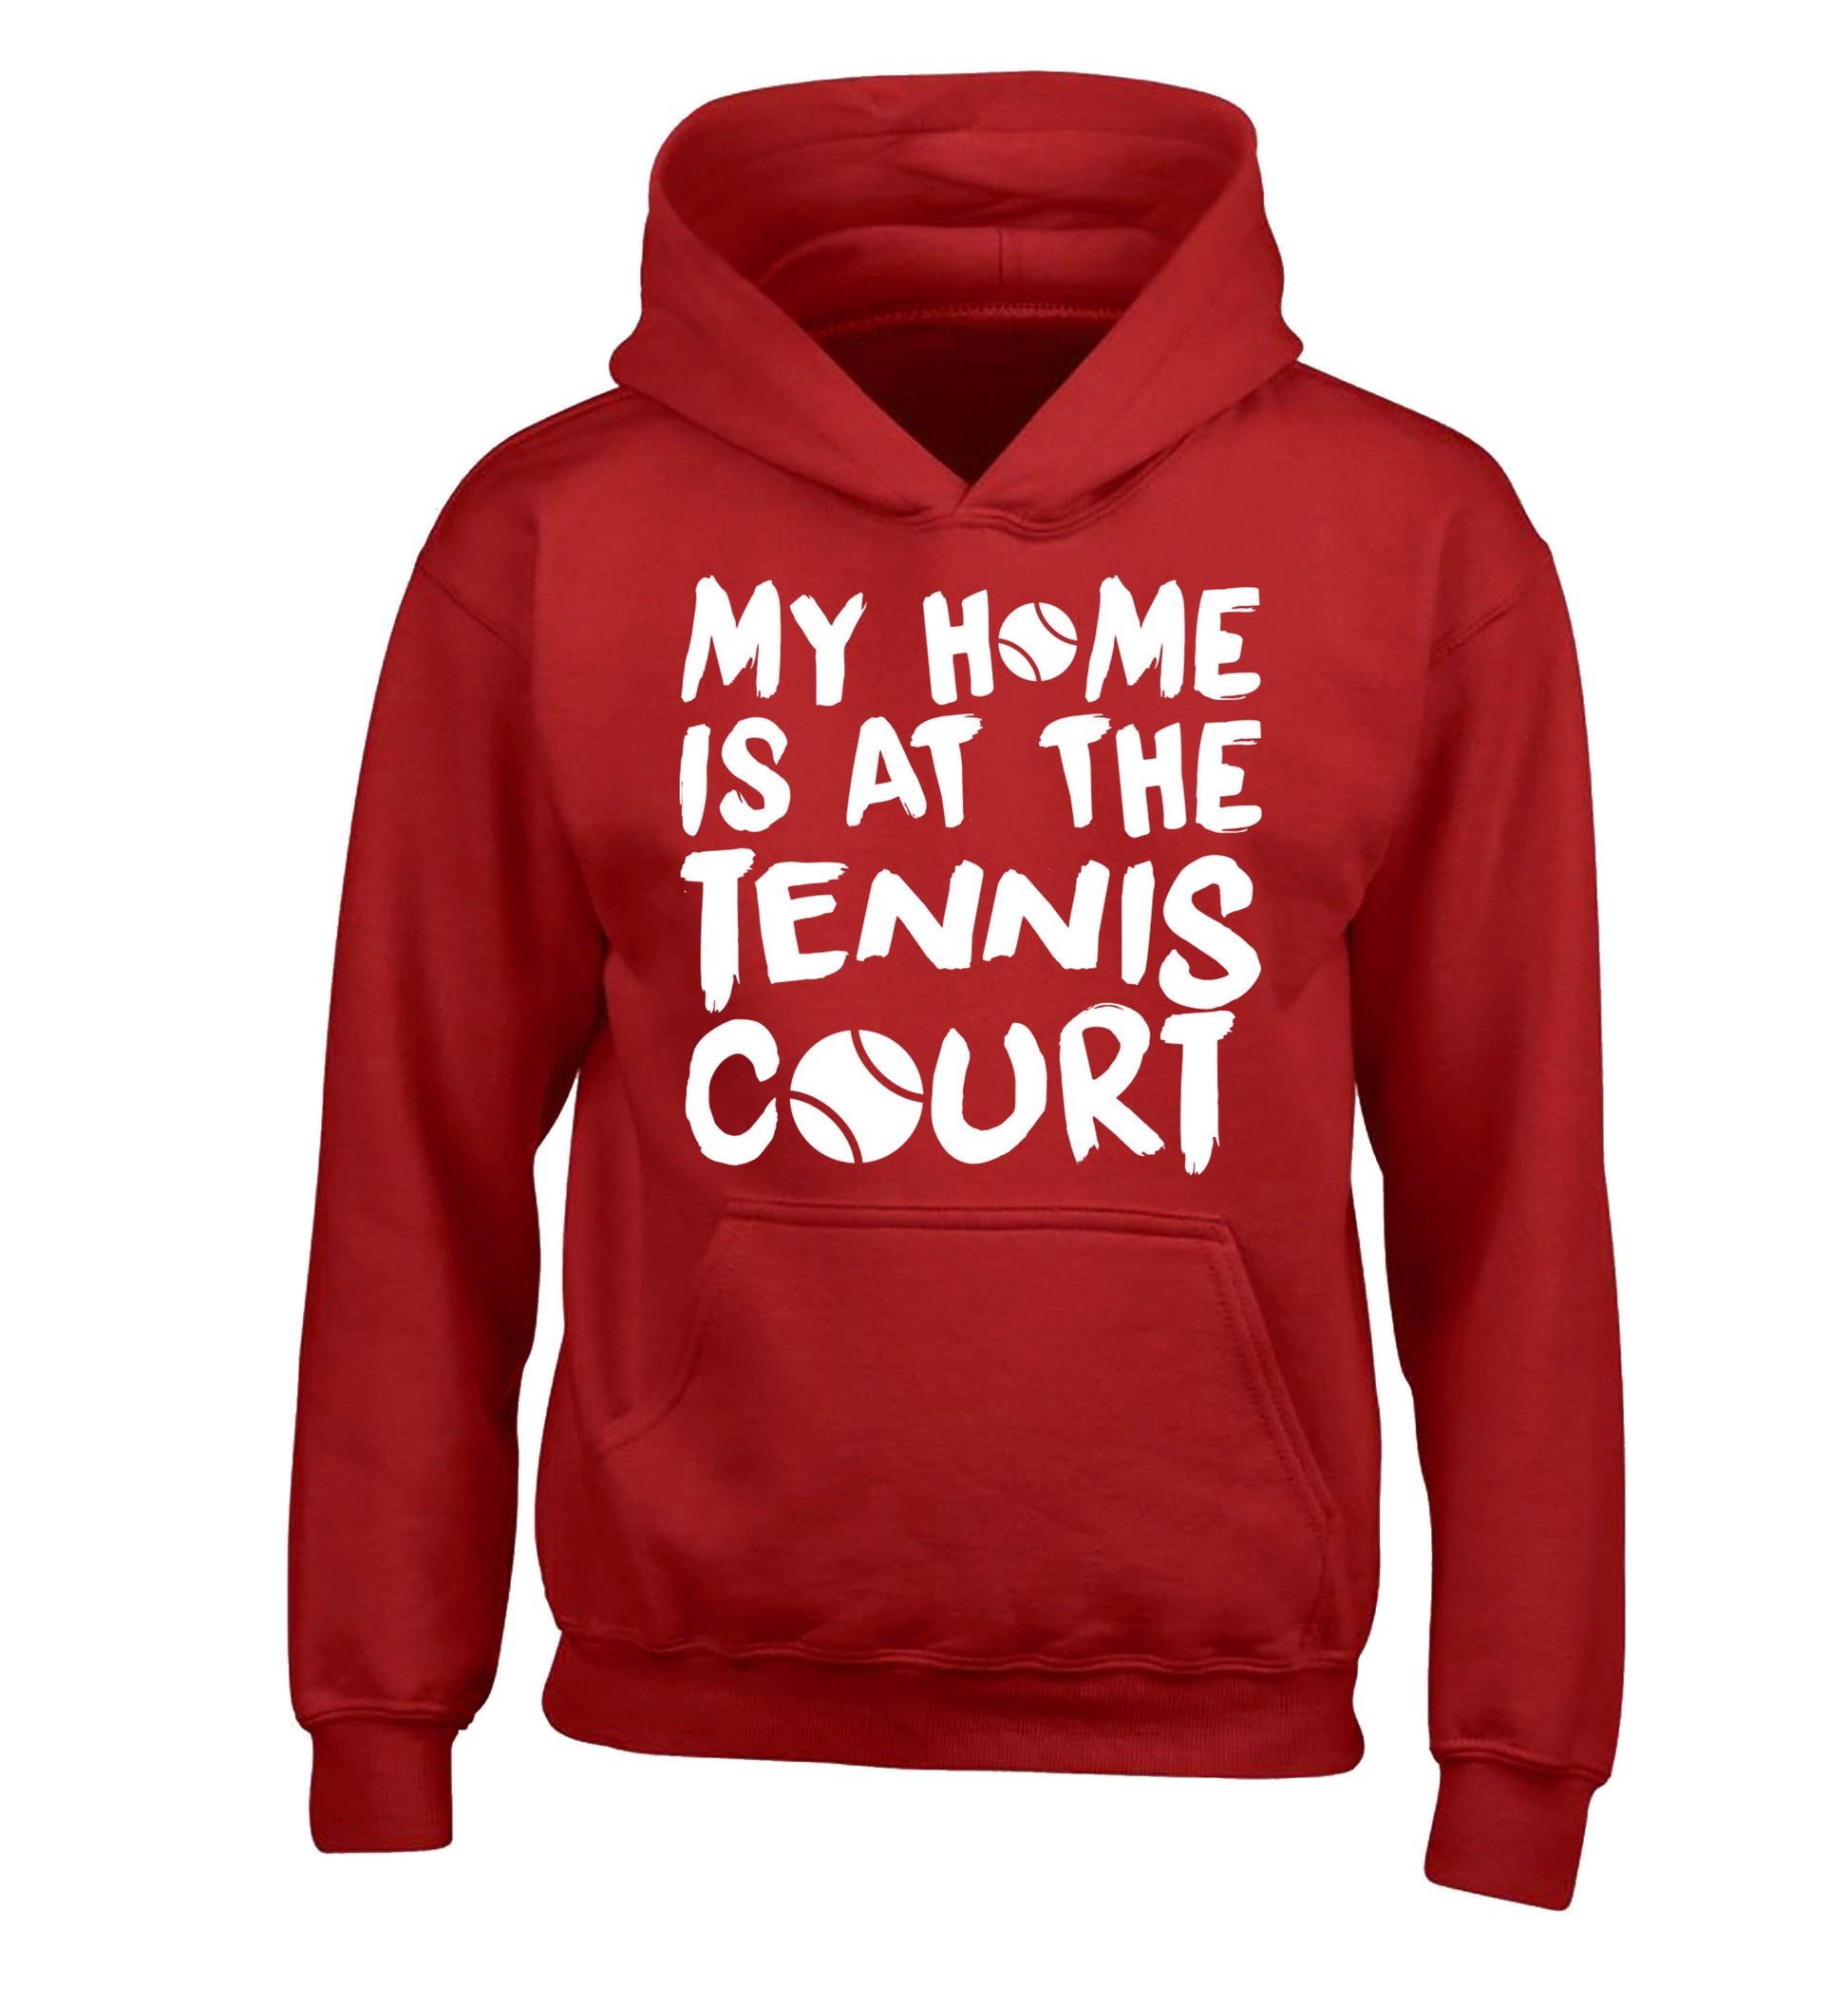 My home is at the tennis court children's red hoodie 12-14 Years